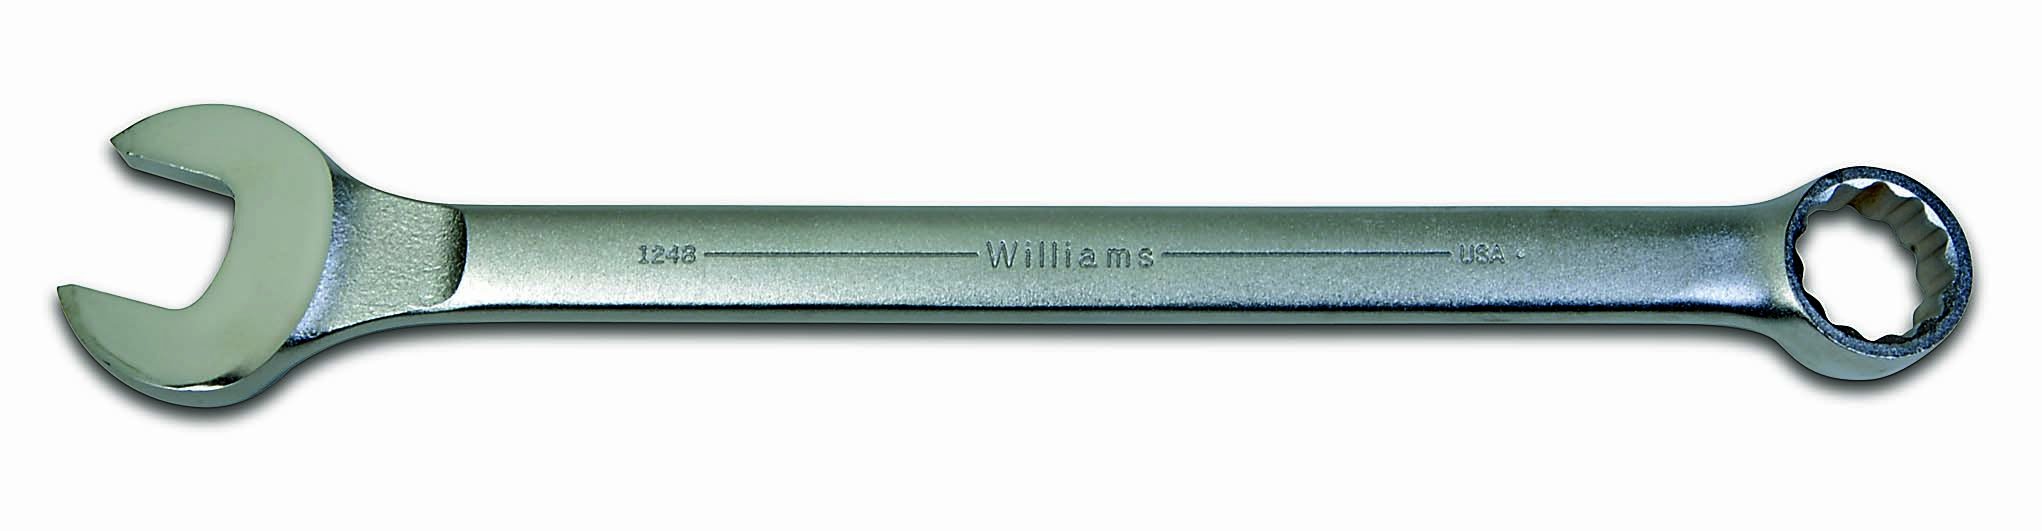 Williams 1242 1-516-Inch Super Combo Wrench by Snap-on Industrial Brand JH Williams 並行輸入品並行輸入品